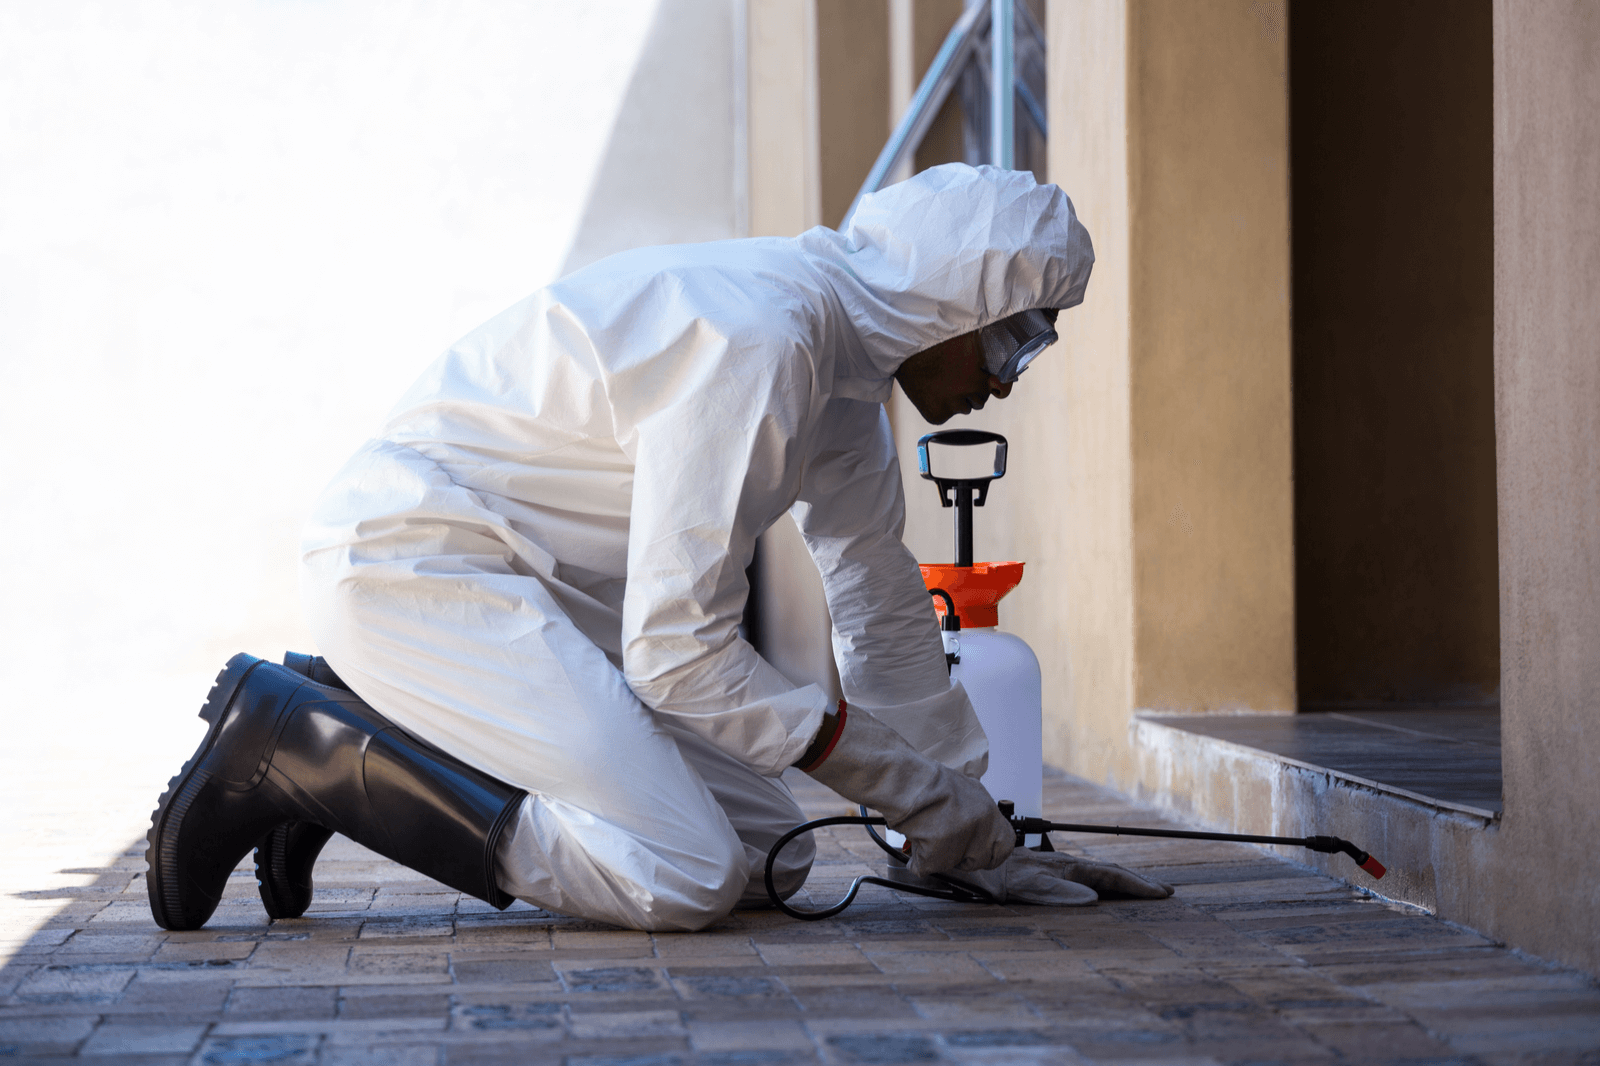 Man in hazmat suit applying insecticide to a building entryway